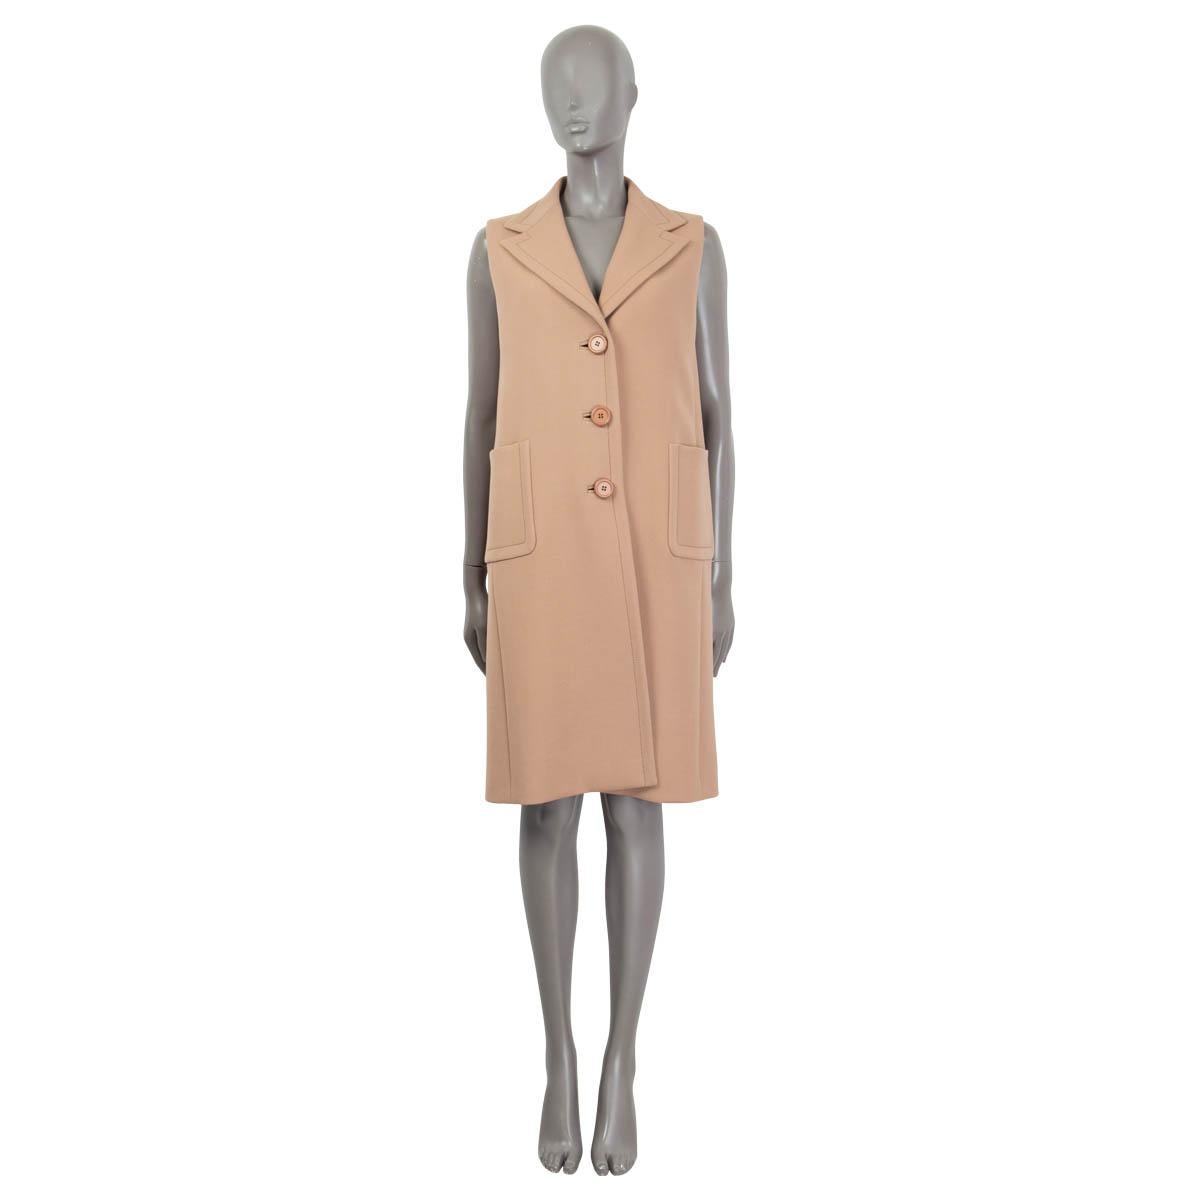 100% authentic Prada sleeveless coat in camel brown wool (100%). Featuring two patch pockets on the front and a notched collar. Closes with buttons on the front. Has been worn and is in excellent condition.

Measurements
Tag Size	44
Size	L
Shoulder